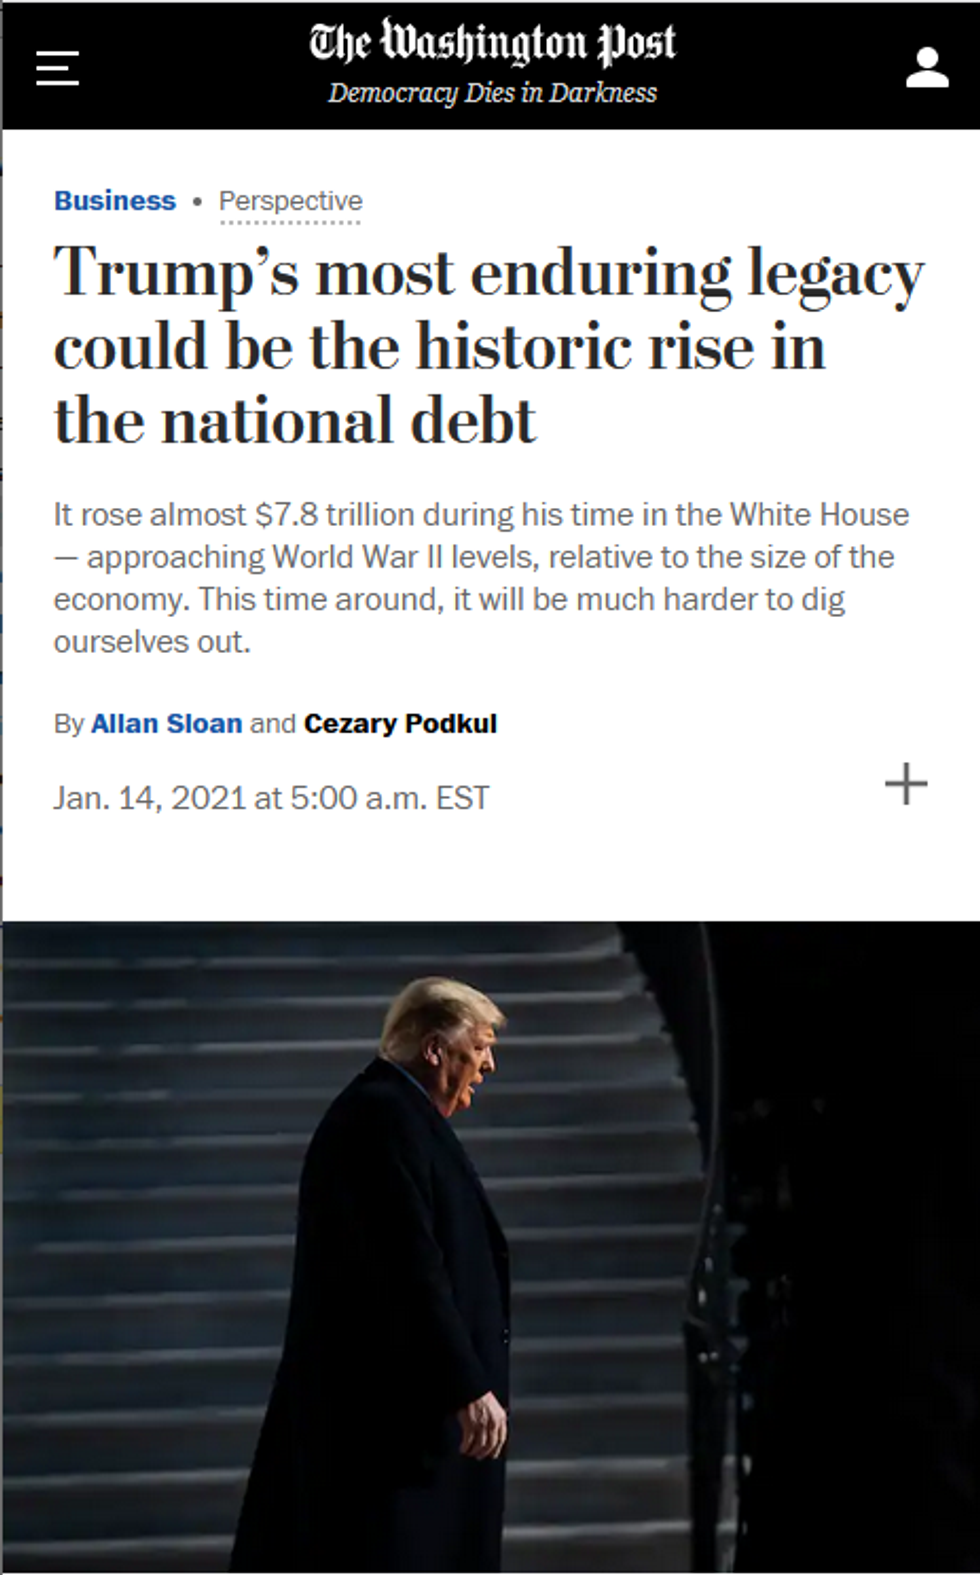 WaPo: Trump's most enduring legacy could be the historic rise in the national debt